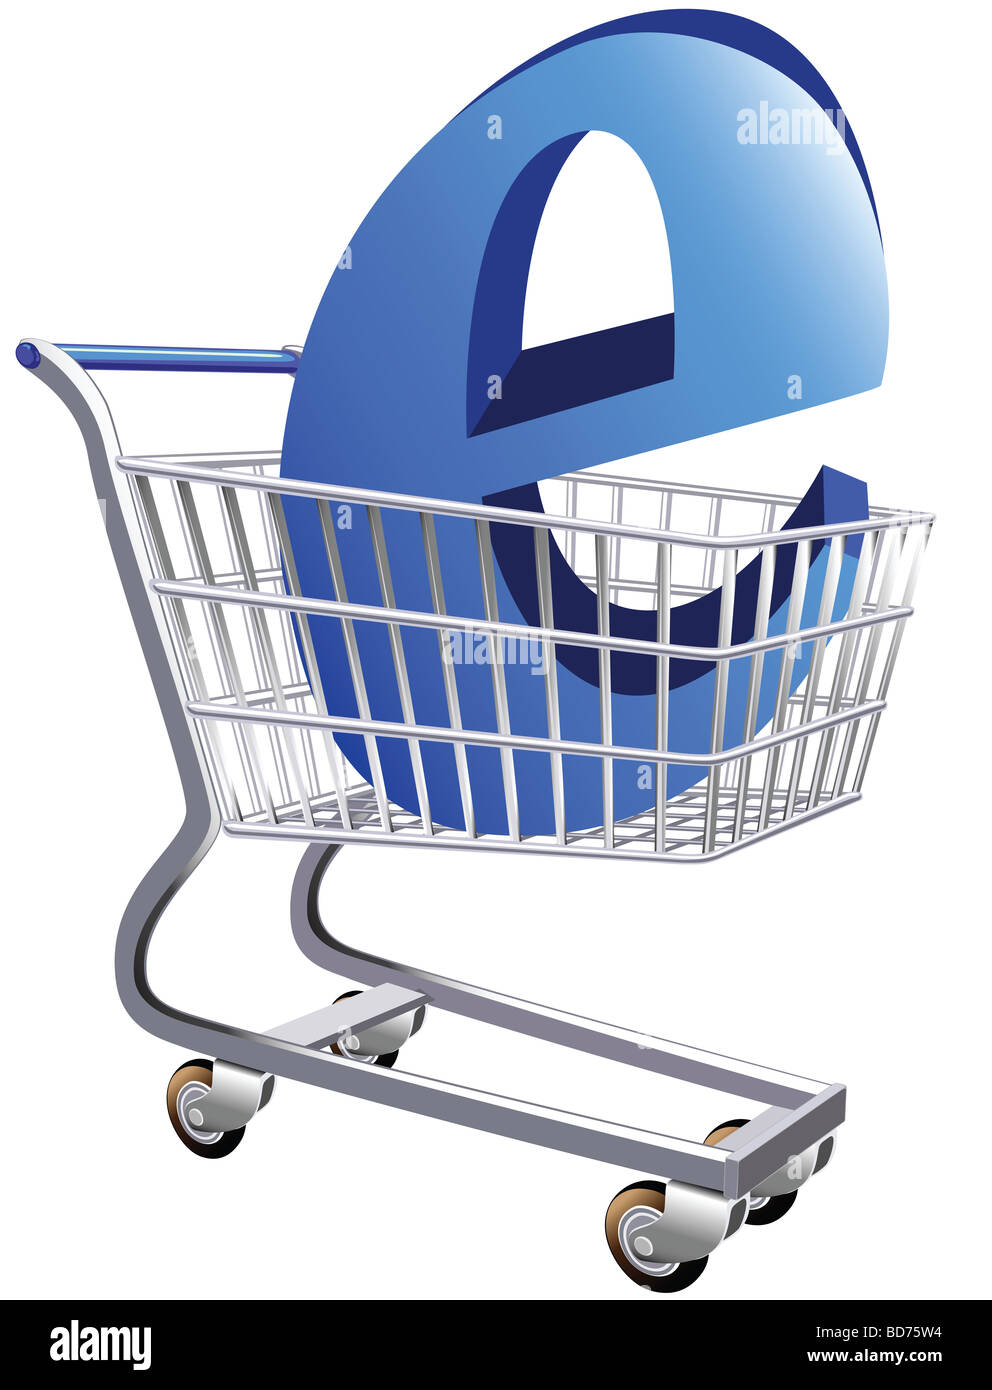 Illustration of a shopping cart with a large E symbol representing ecommerce Stock Photo